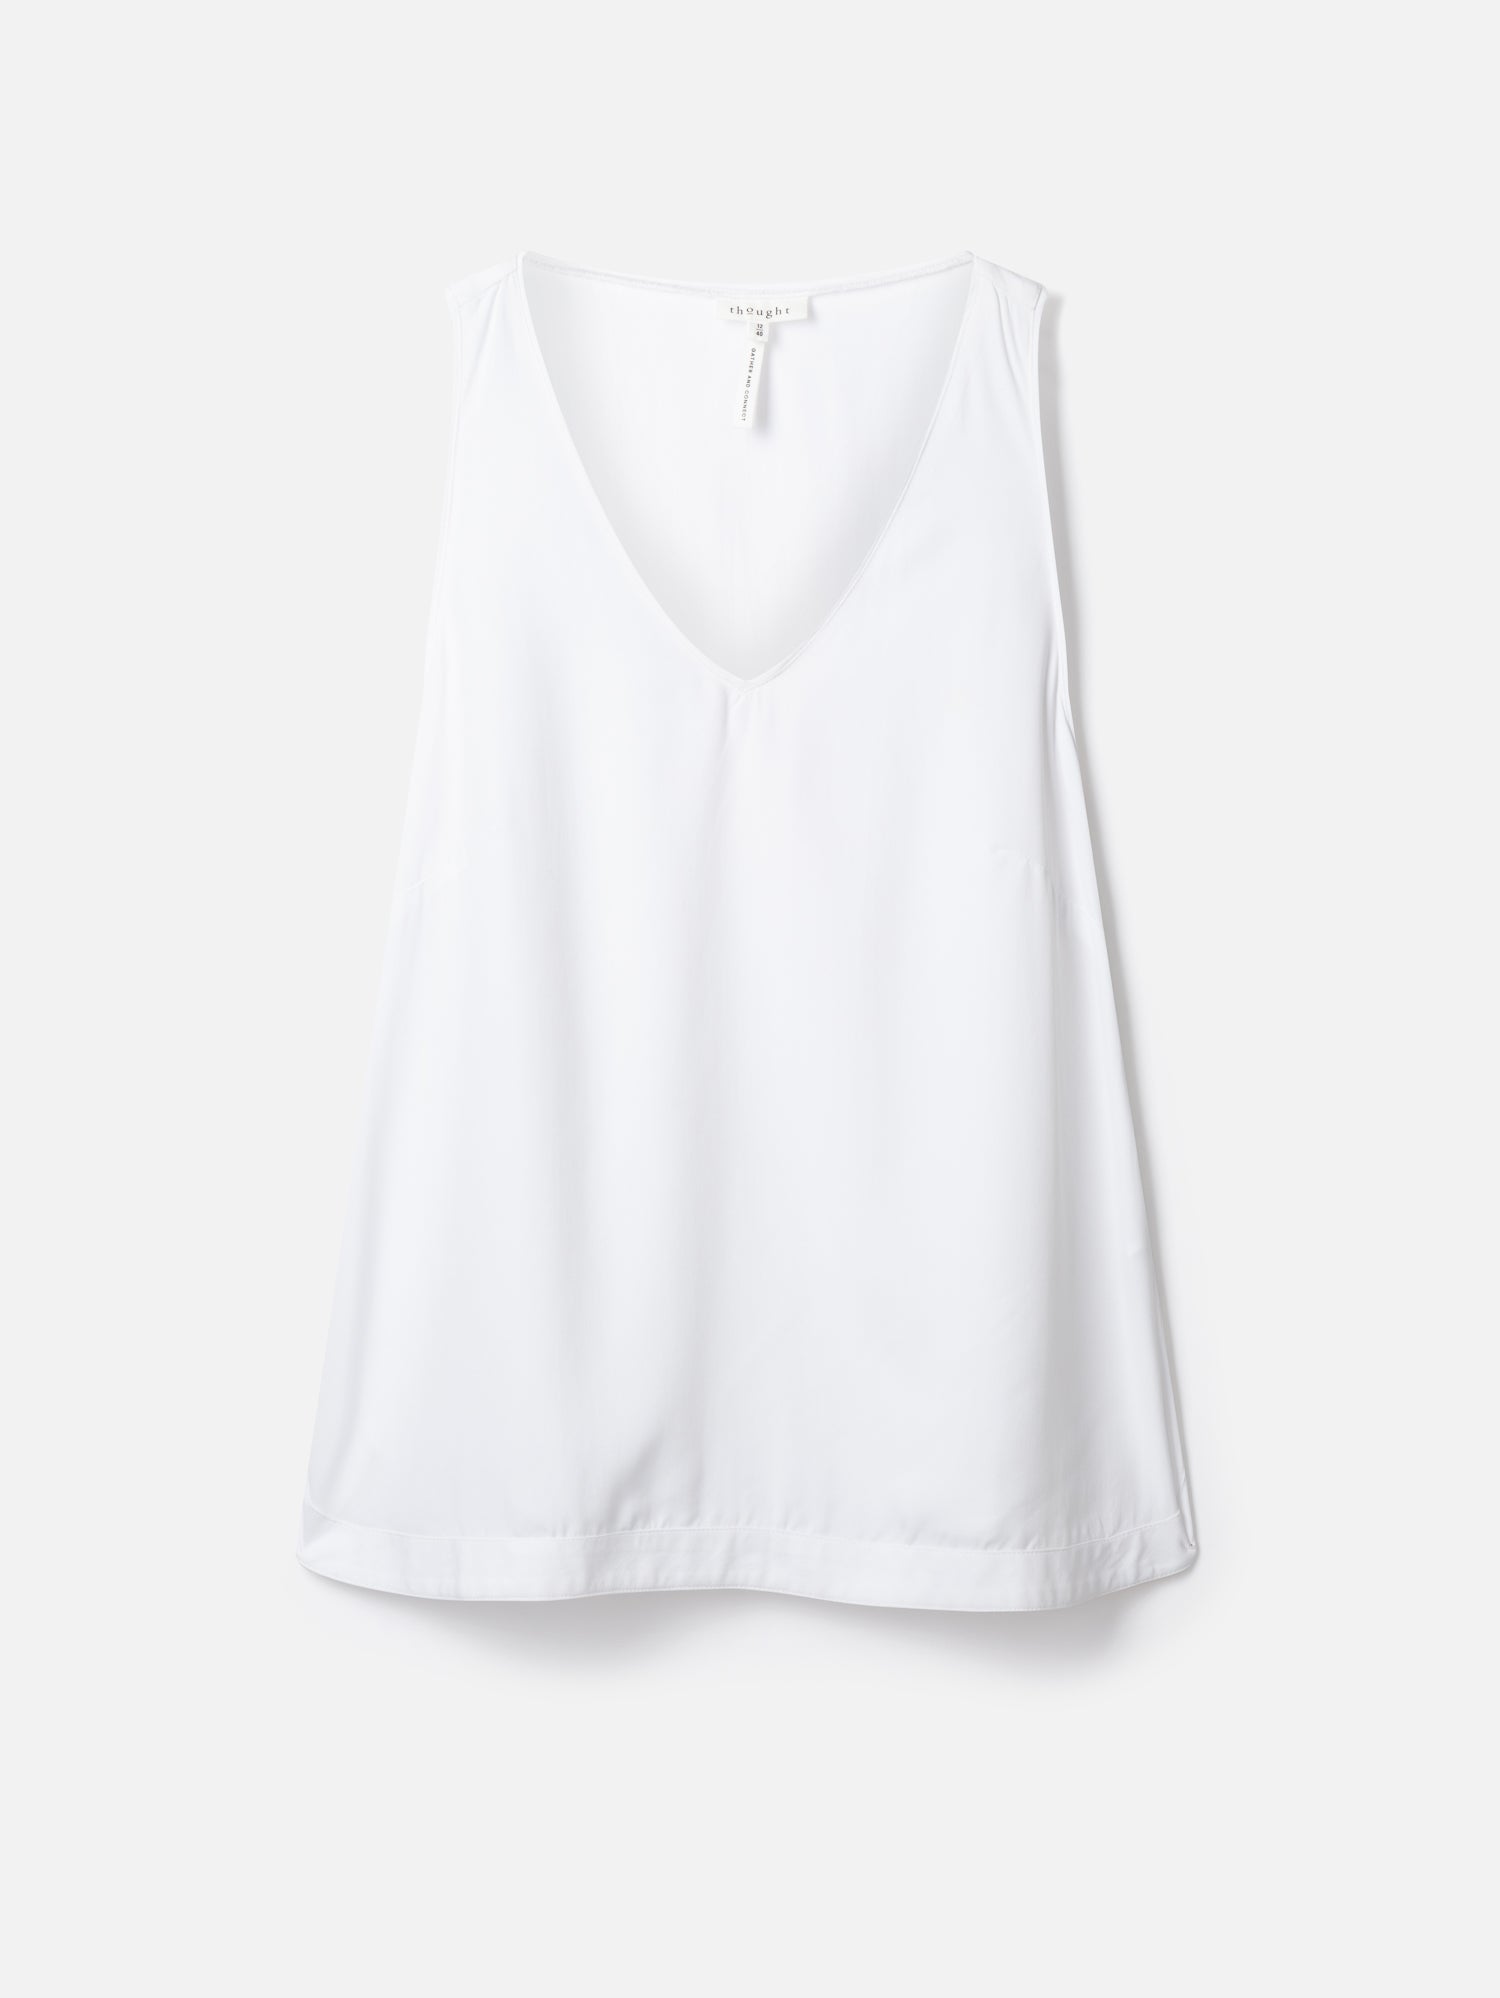 The Ultimate Modal Cami Top